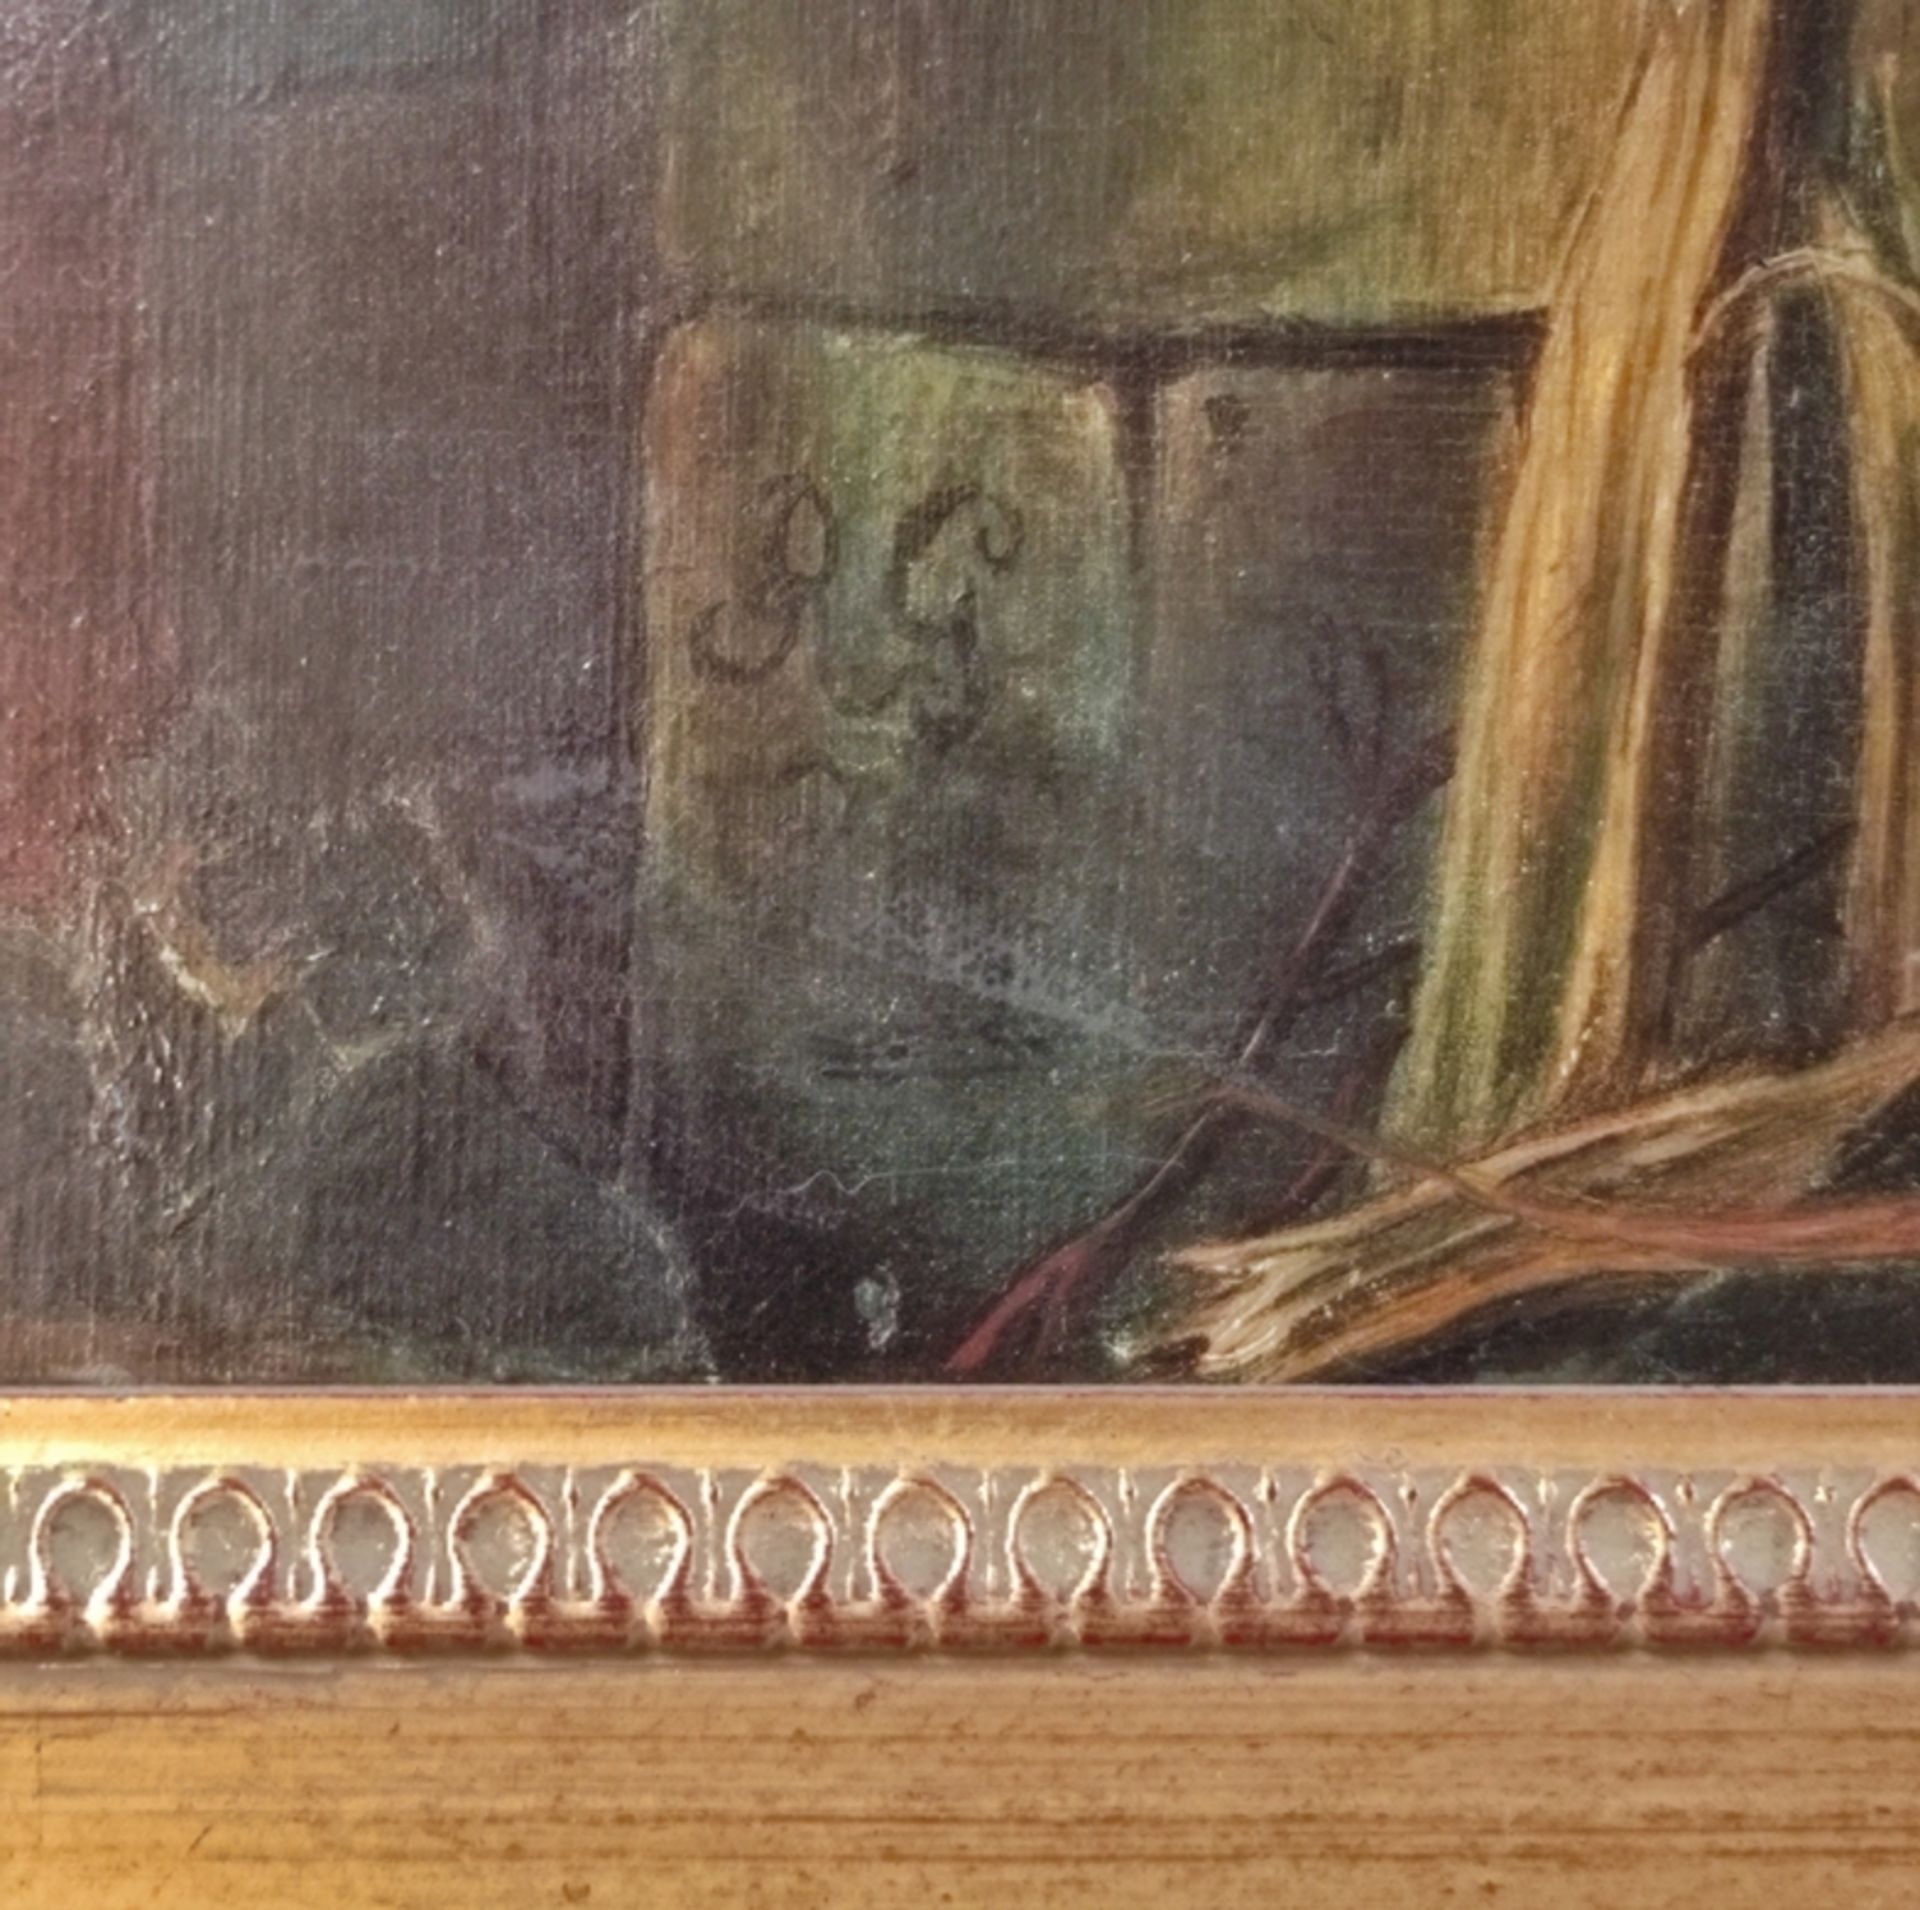 Monogramist (19th century) "At the stove", young woman looking into a pot, oil on canvas, monogramm - Image 3 of 4